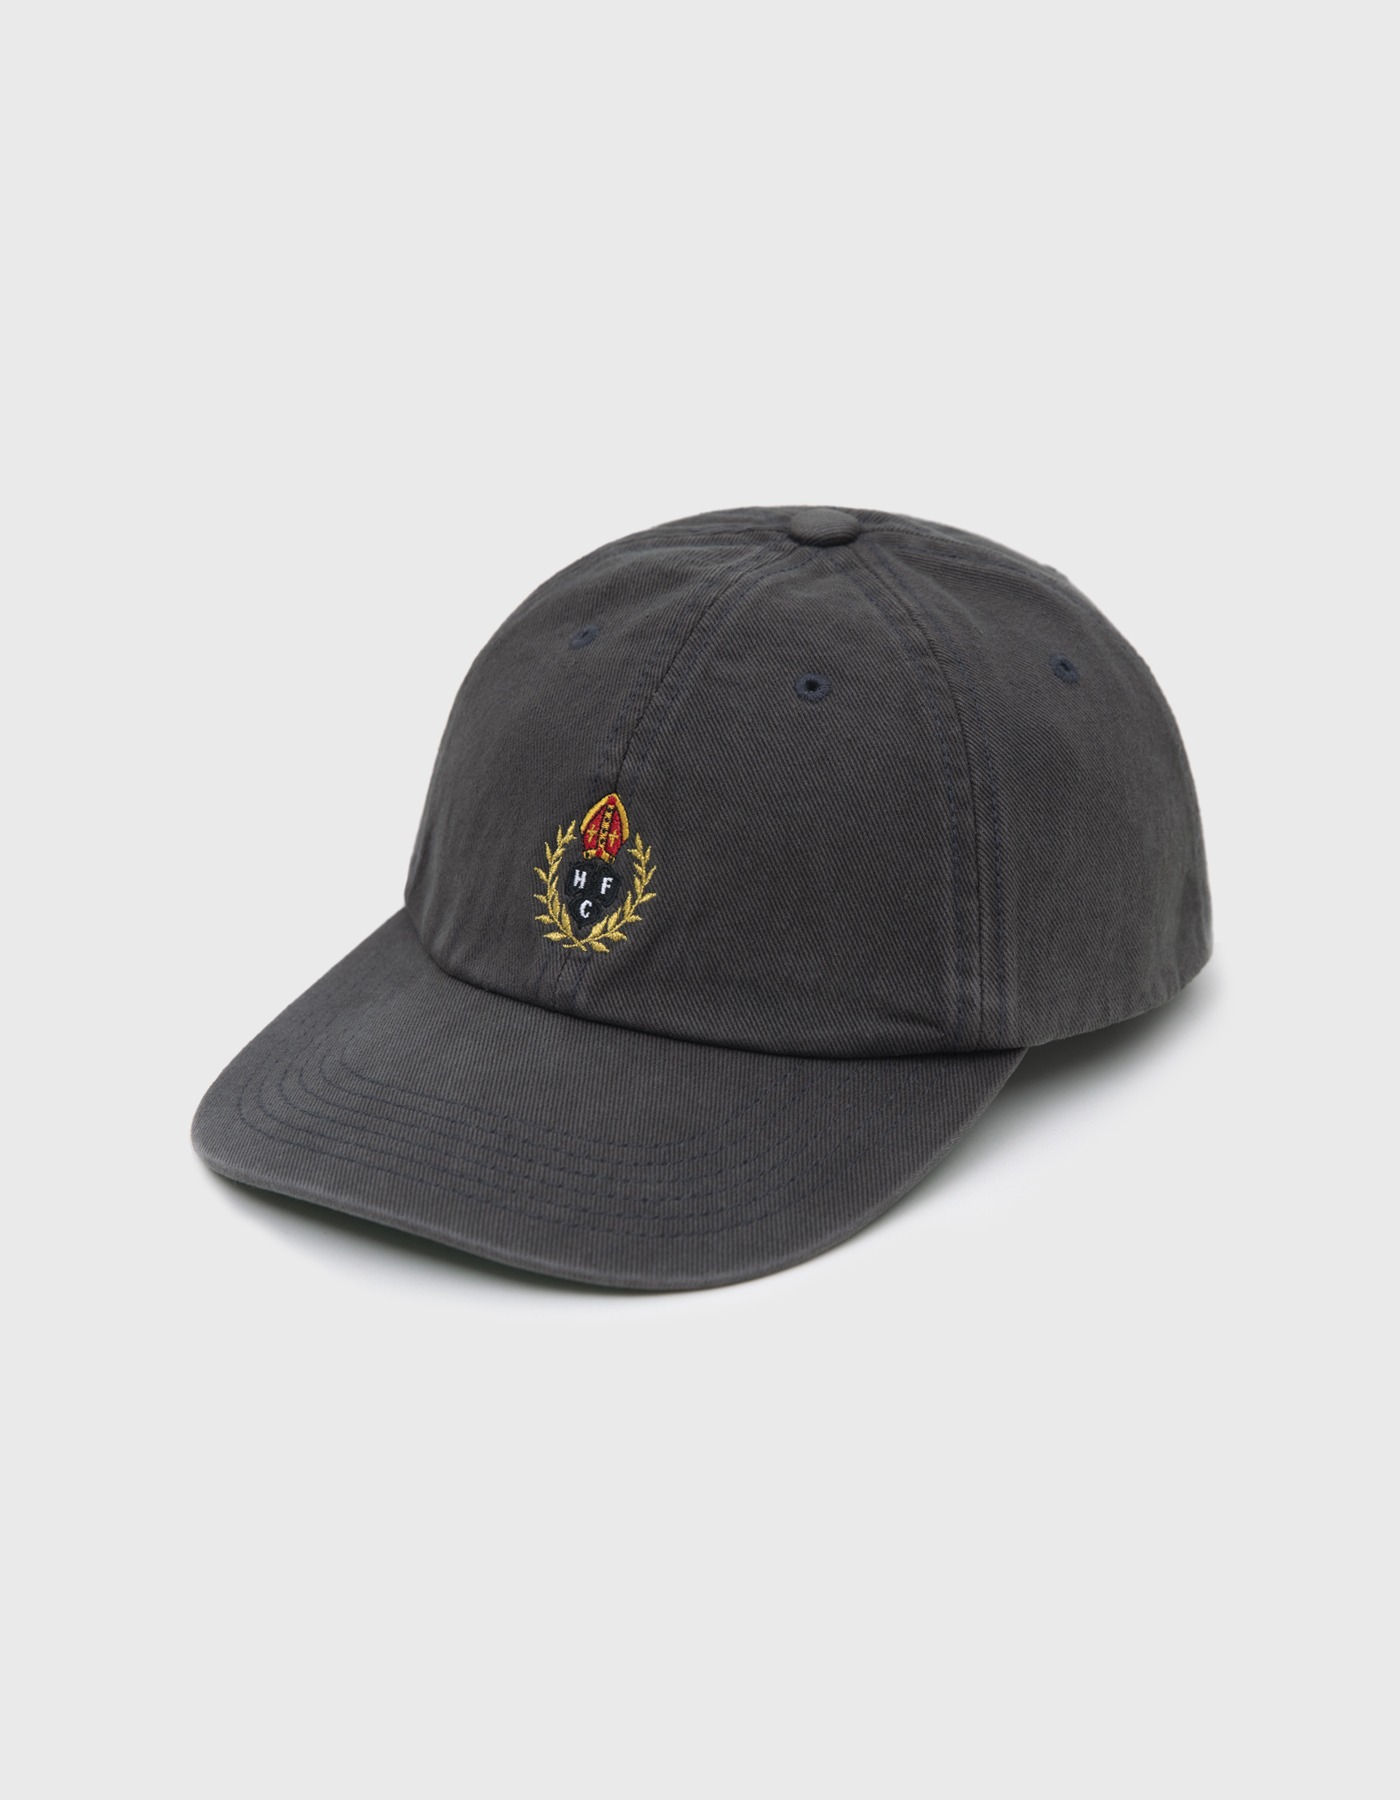 HFC CREST TWILL WASHED CAP / Charcoal